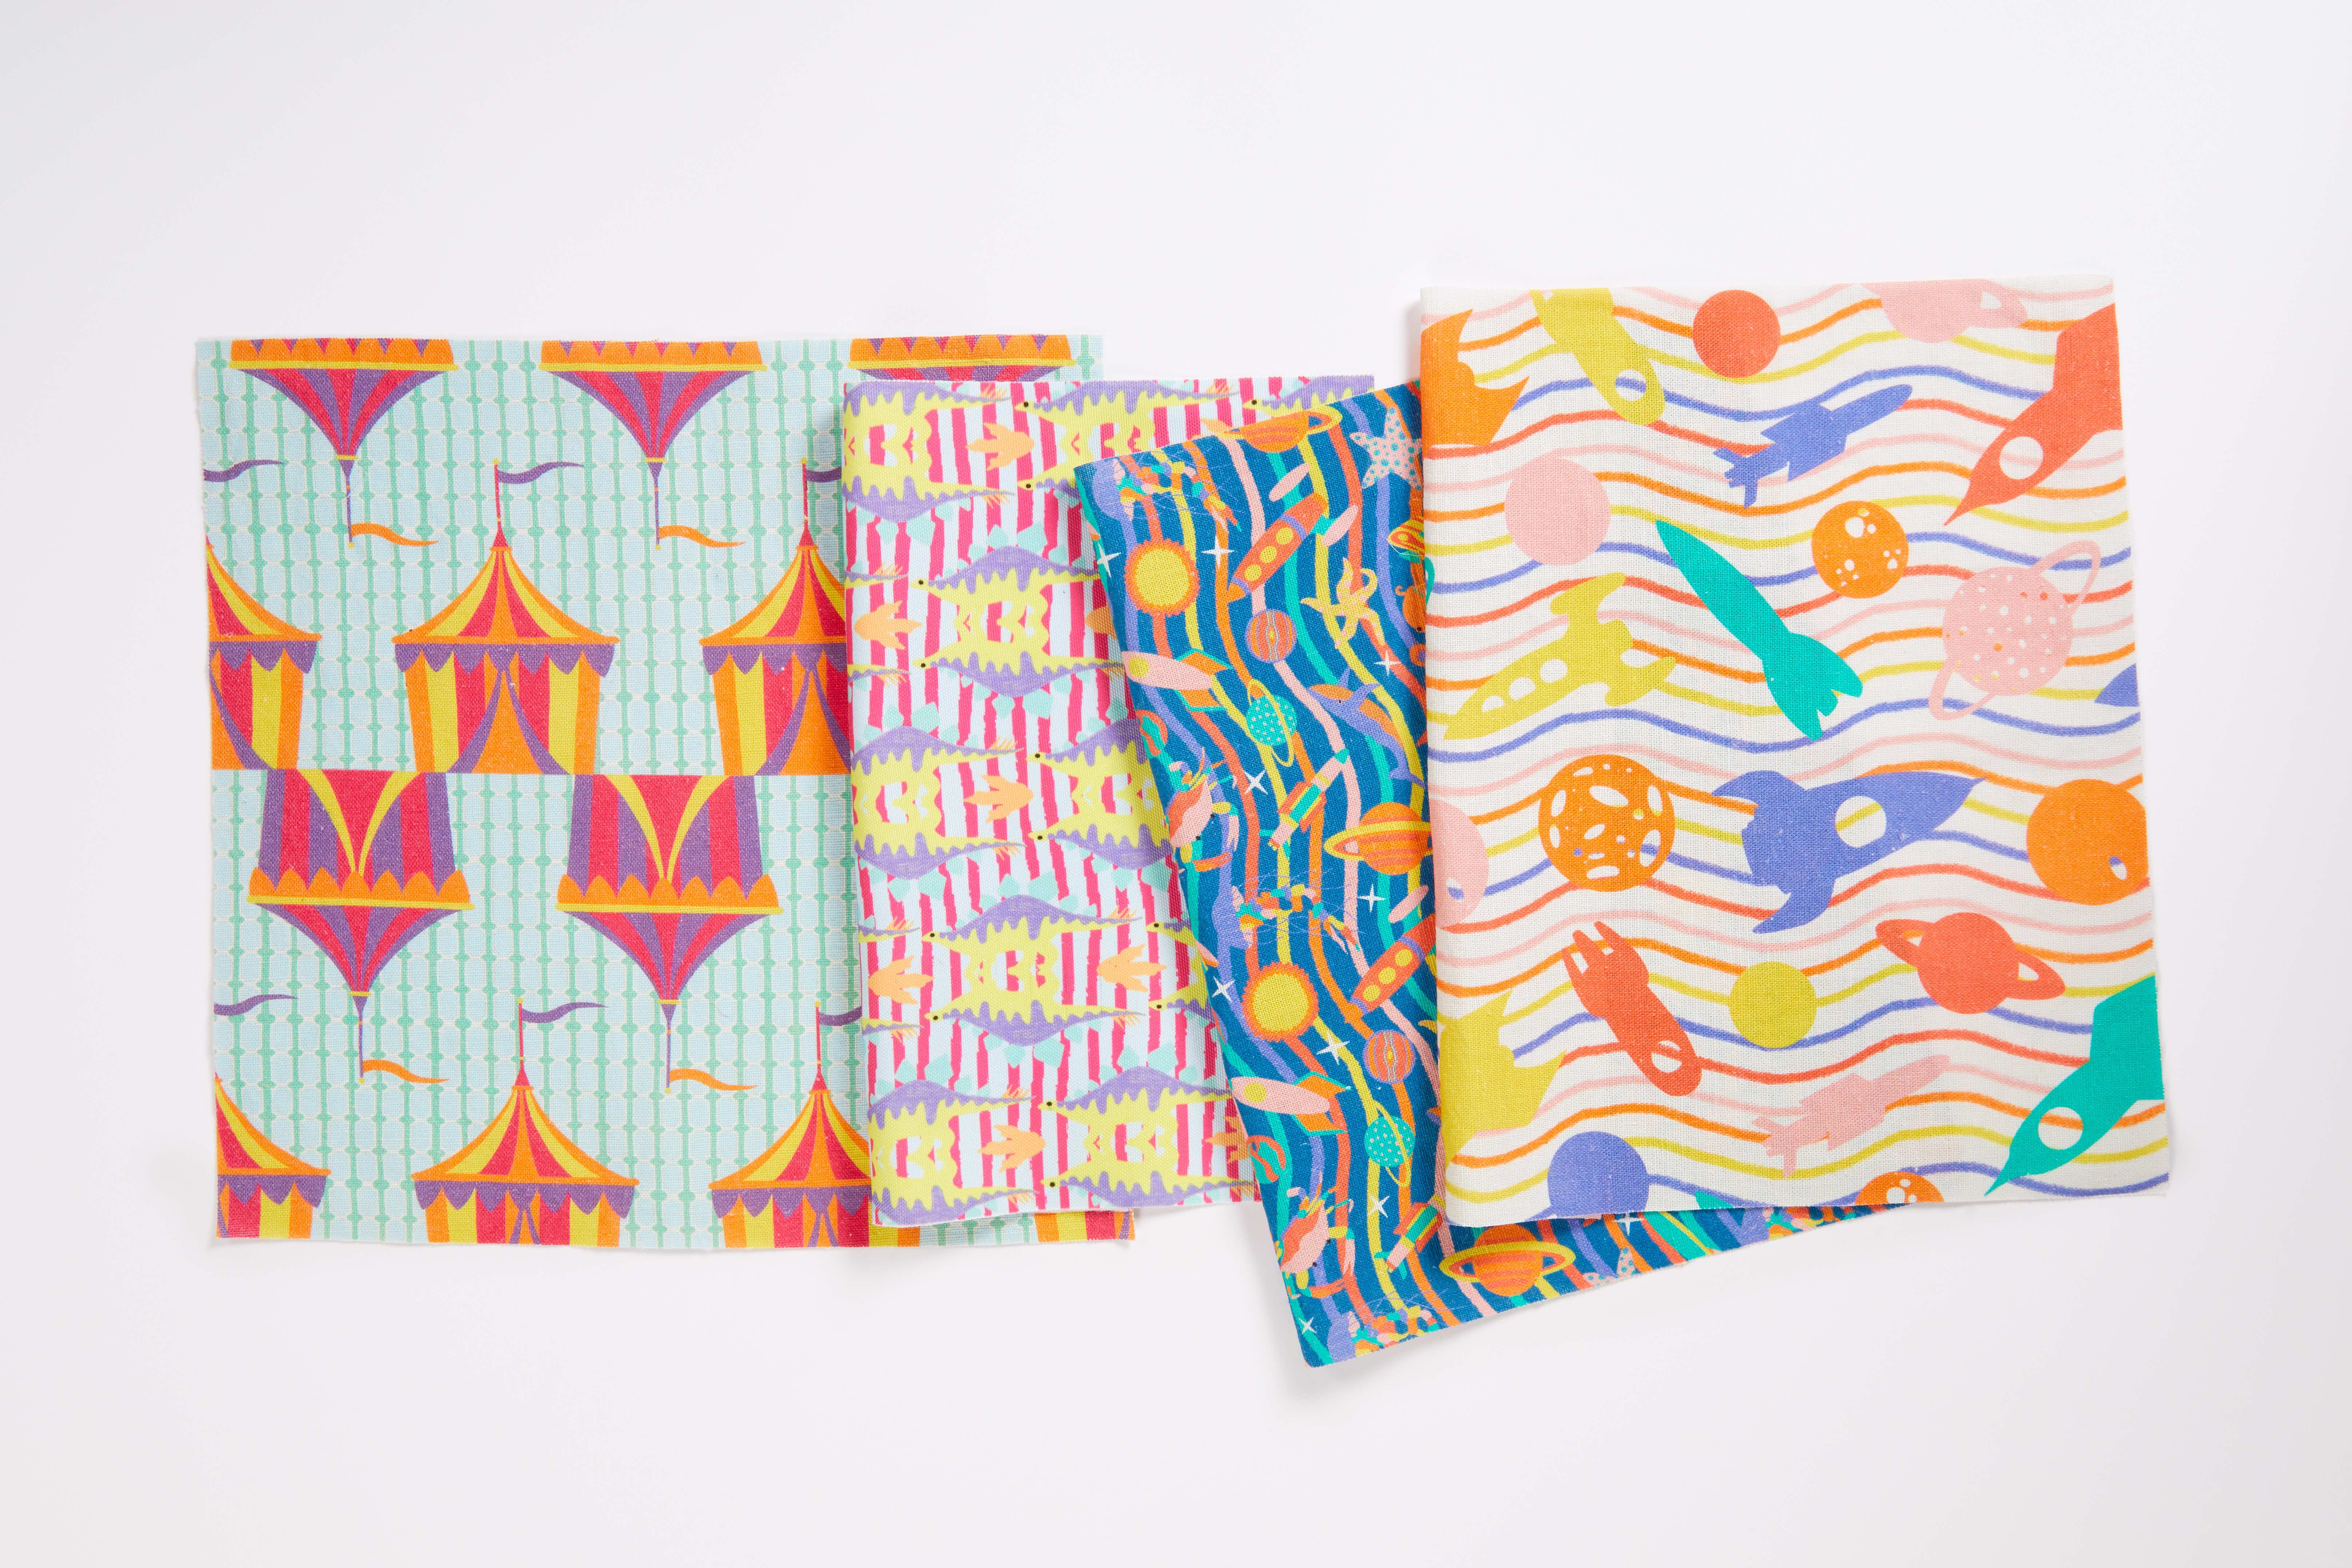 Photograph of 4 colourful fabric samples on white background lying flat.